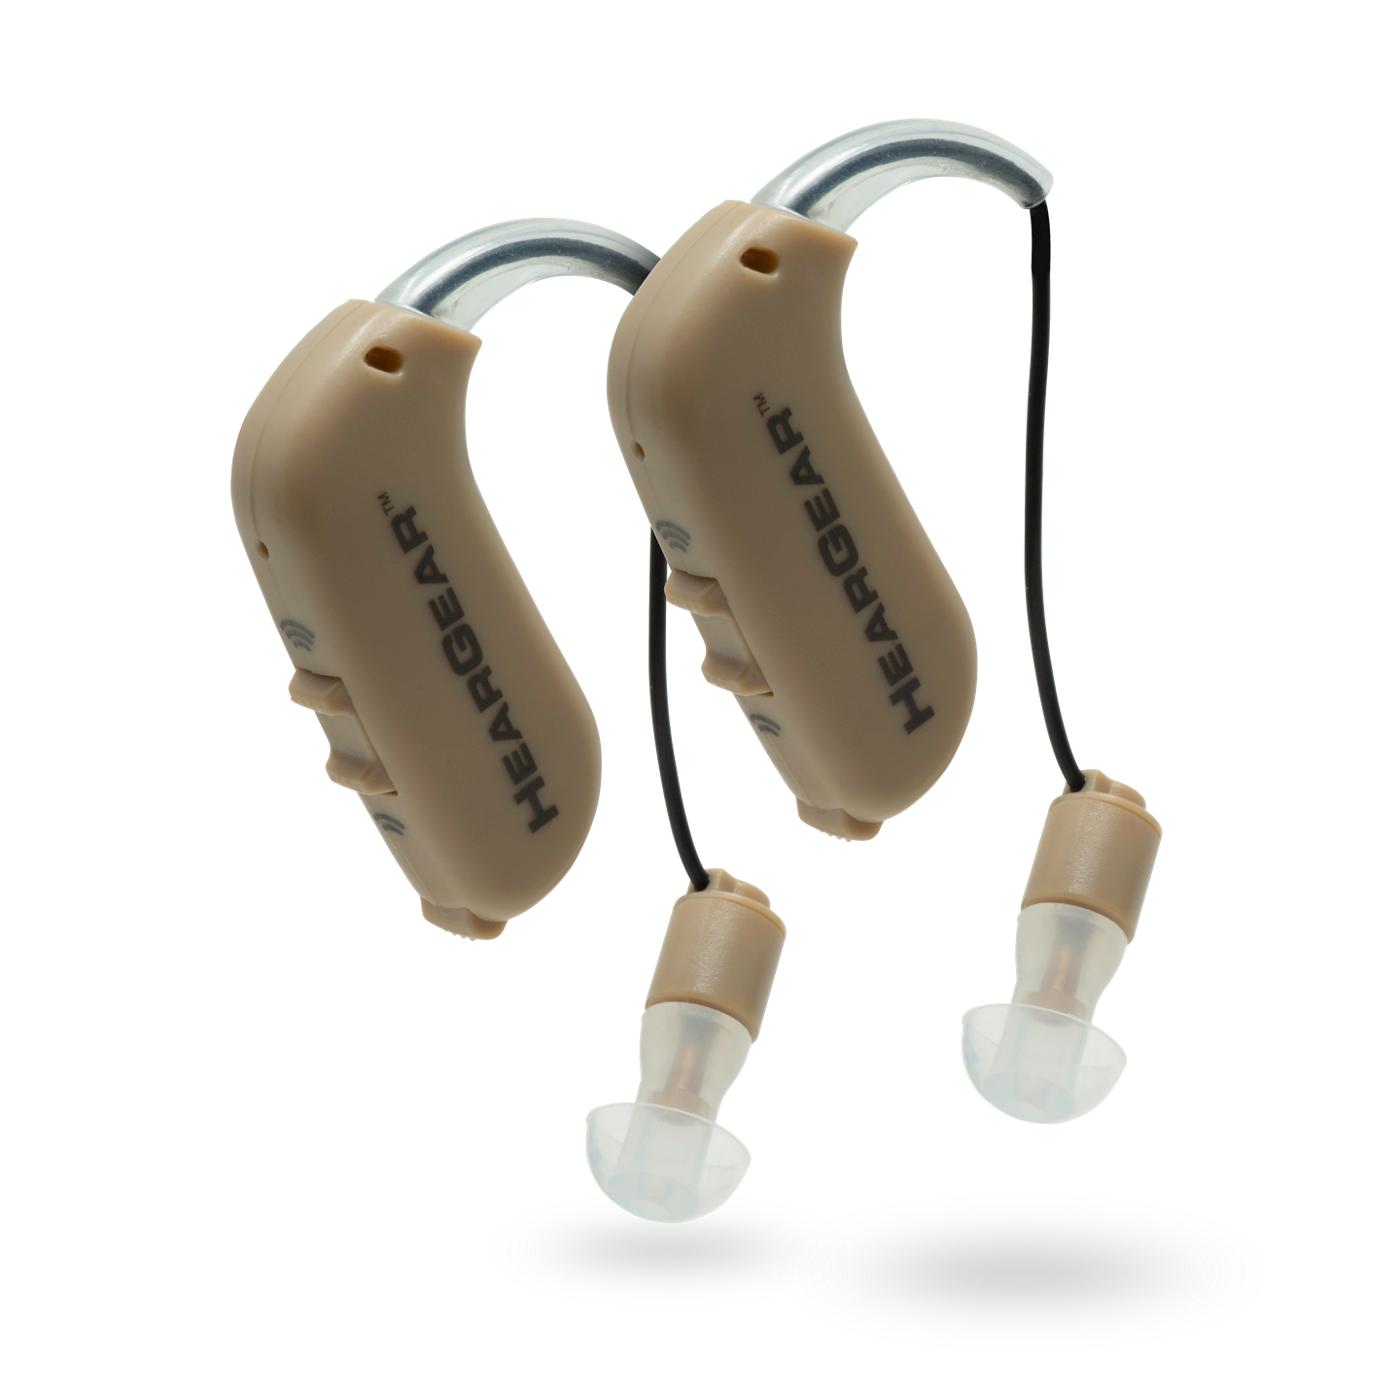 Lucid Audio HearGear Personal Rechargeable Hearing Amplifiers; image 2 of 3